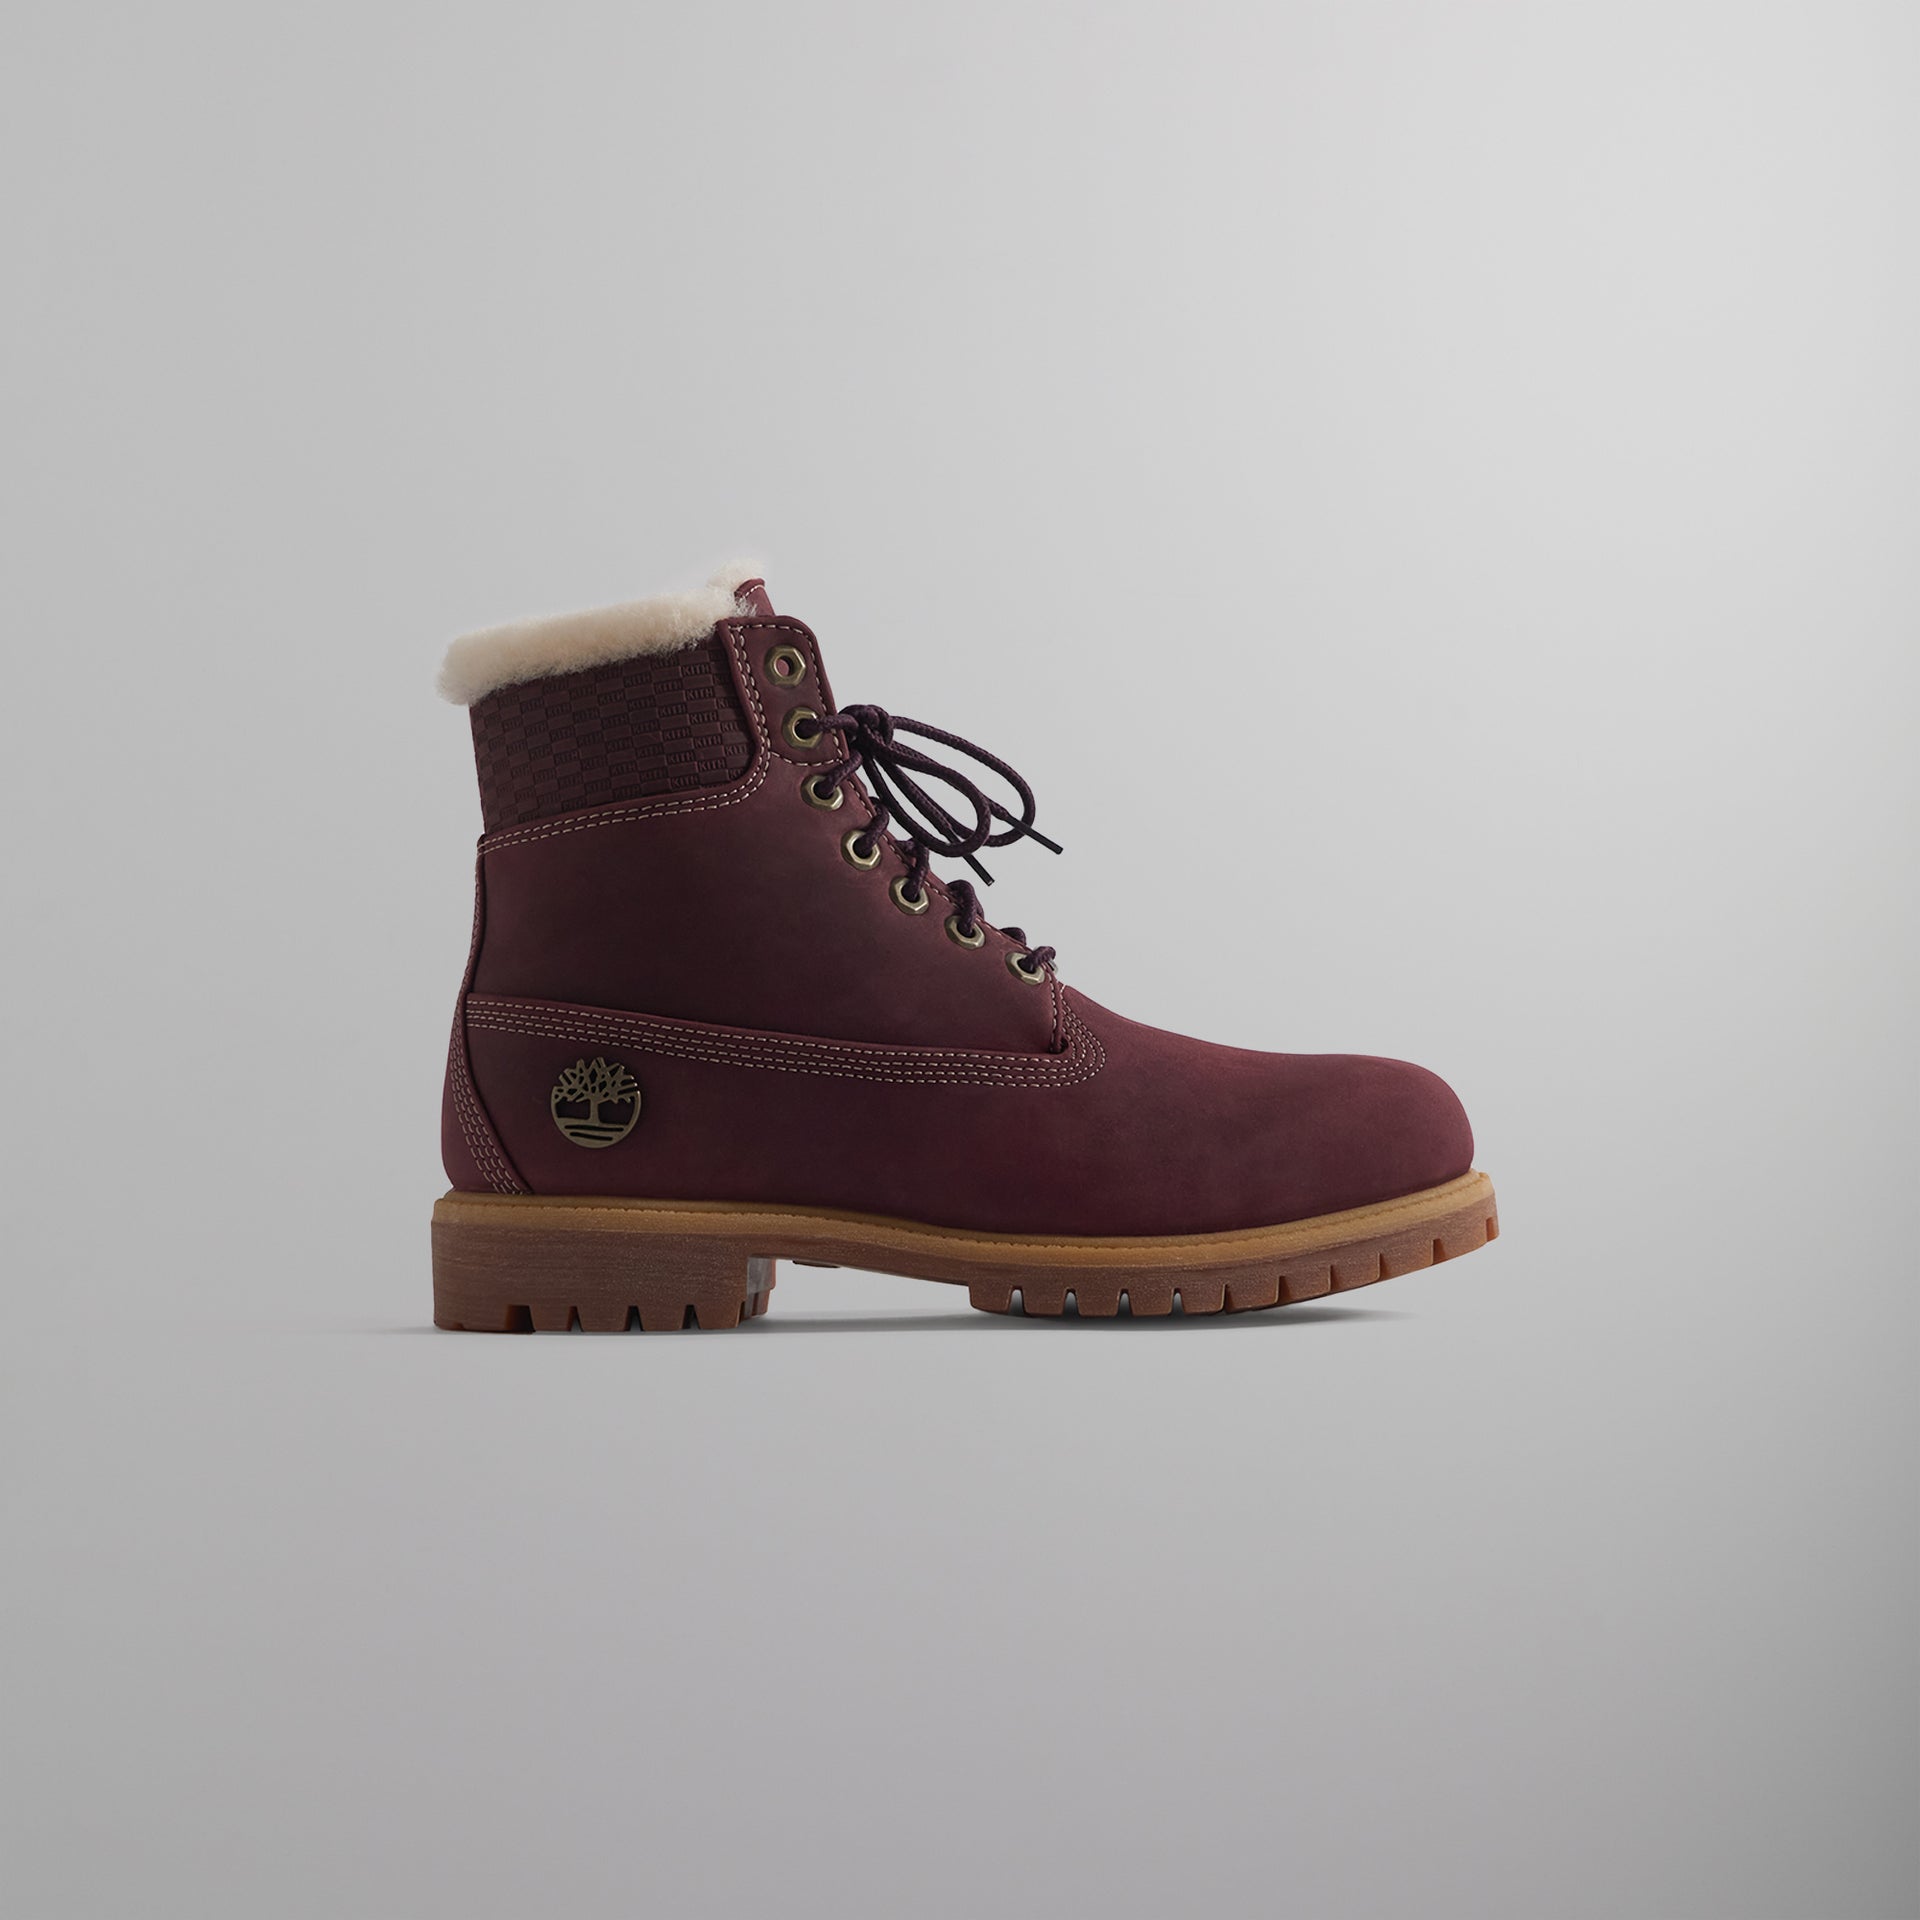 Ronnie Fieg for Timberland 6" Premium Full Grain Shearling Lined Boot - Burgundy